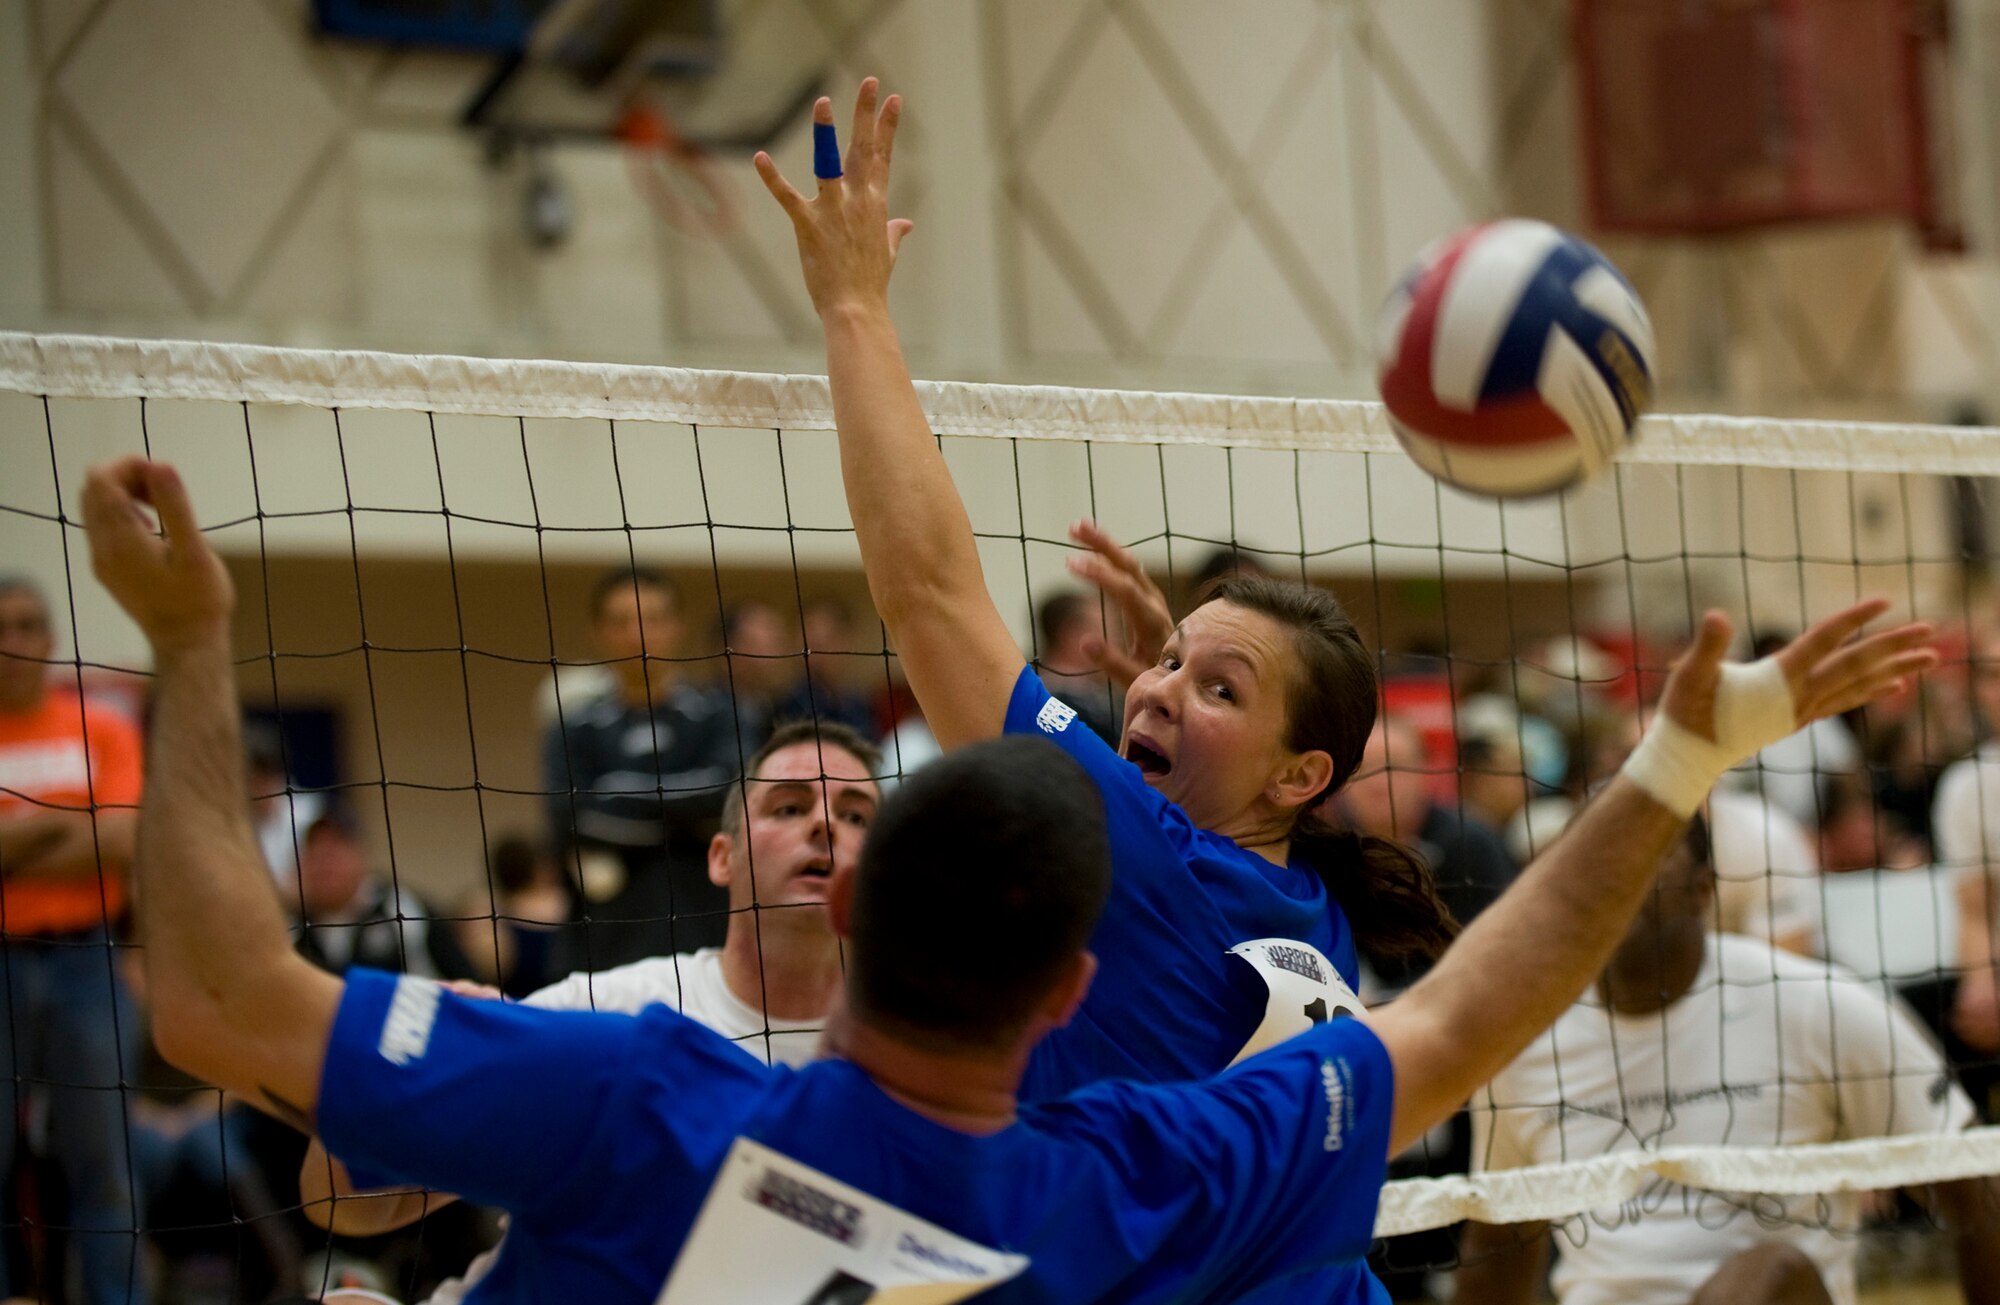 Retired Staff Sgt. Stacy Pearsall looks back as volleyball slips past and is saved by Staff Sgt. Christopher D?Angelo during the 2011 Warrior Games in Colorado Springs, Colo., May 17. The Air Force played the U.S. Special Operations Command team, losing the series 2 games to 1. (U.S. Air Force photo/Staff Sgt. Christopher Griffin)